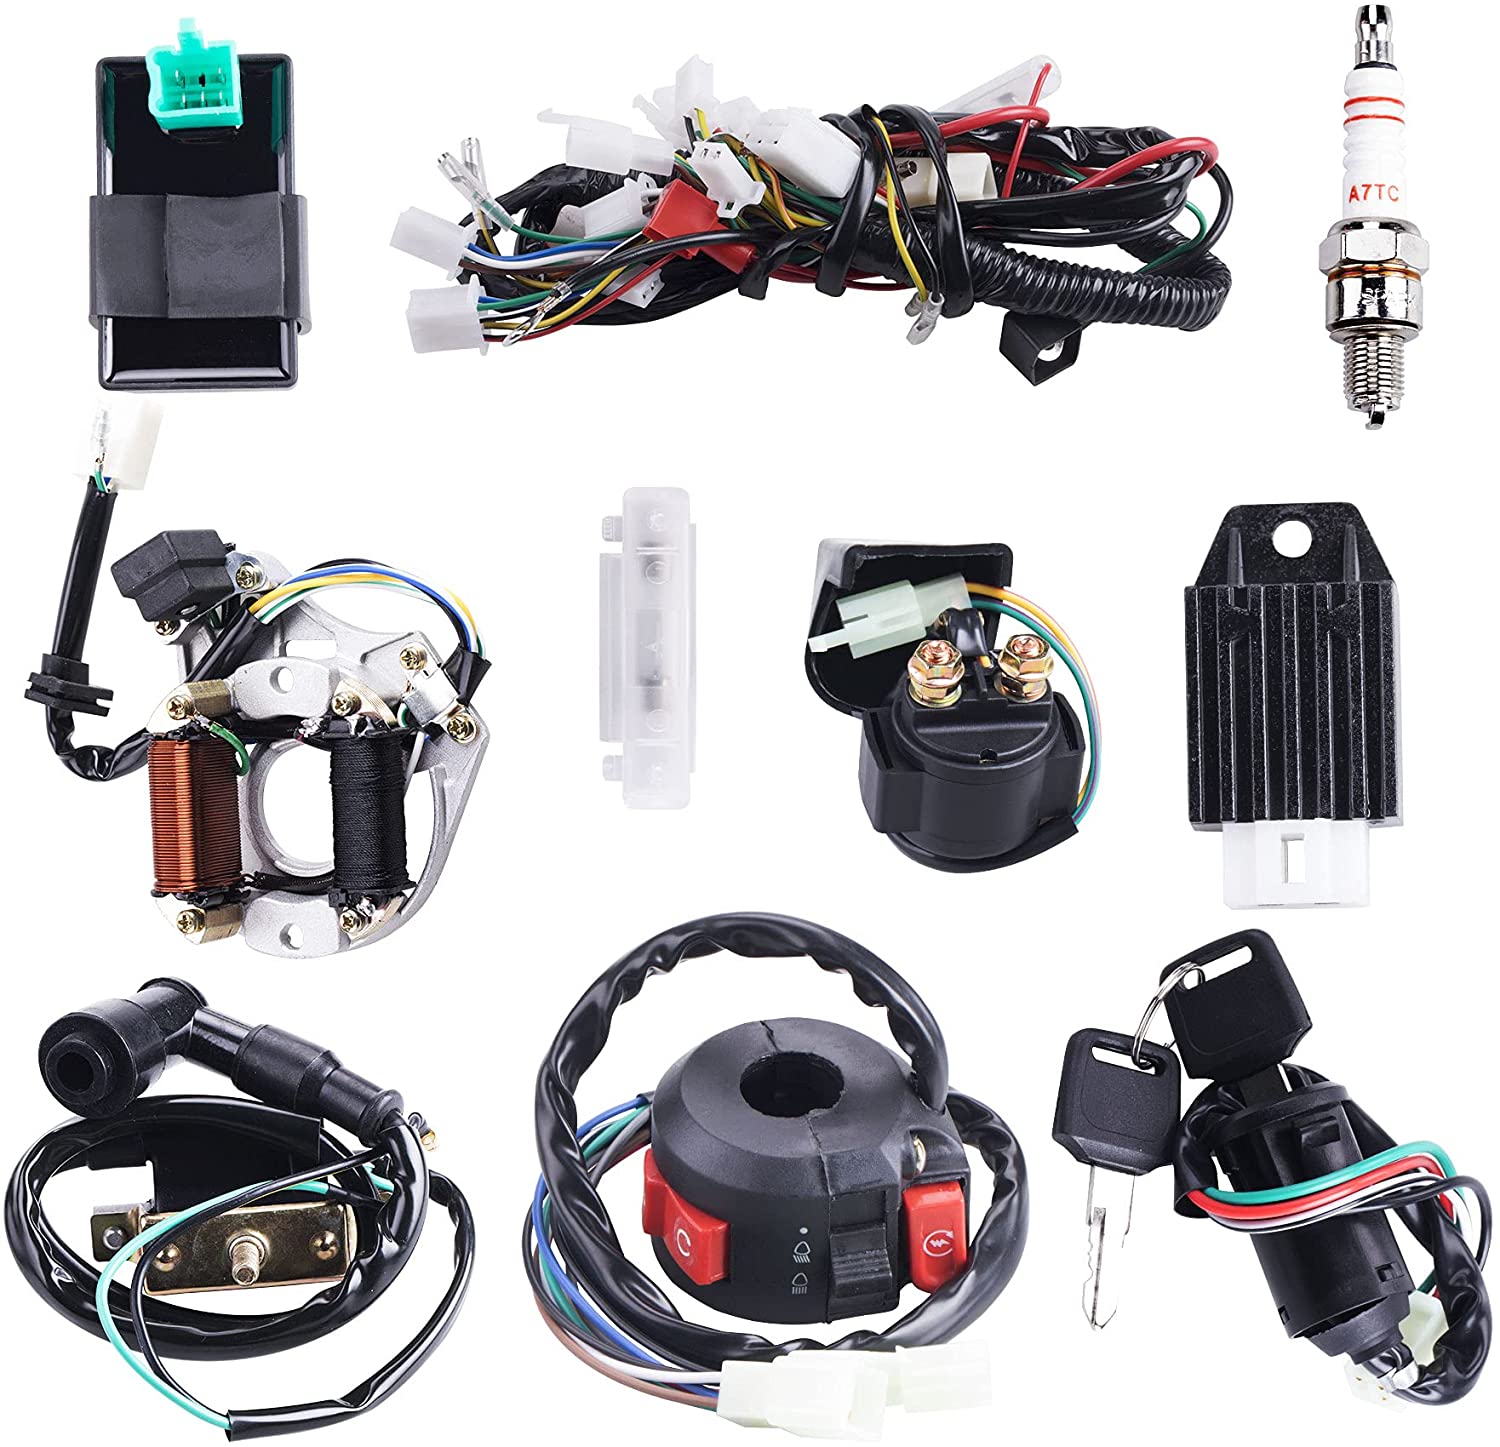 Wiring Harness Set CDI Ignition Coil For 50cc 110cc 125cc ATV PIT Dirt Bike 